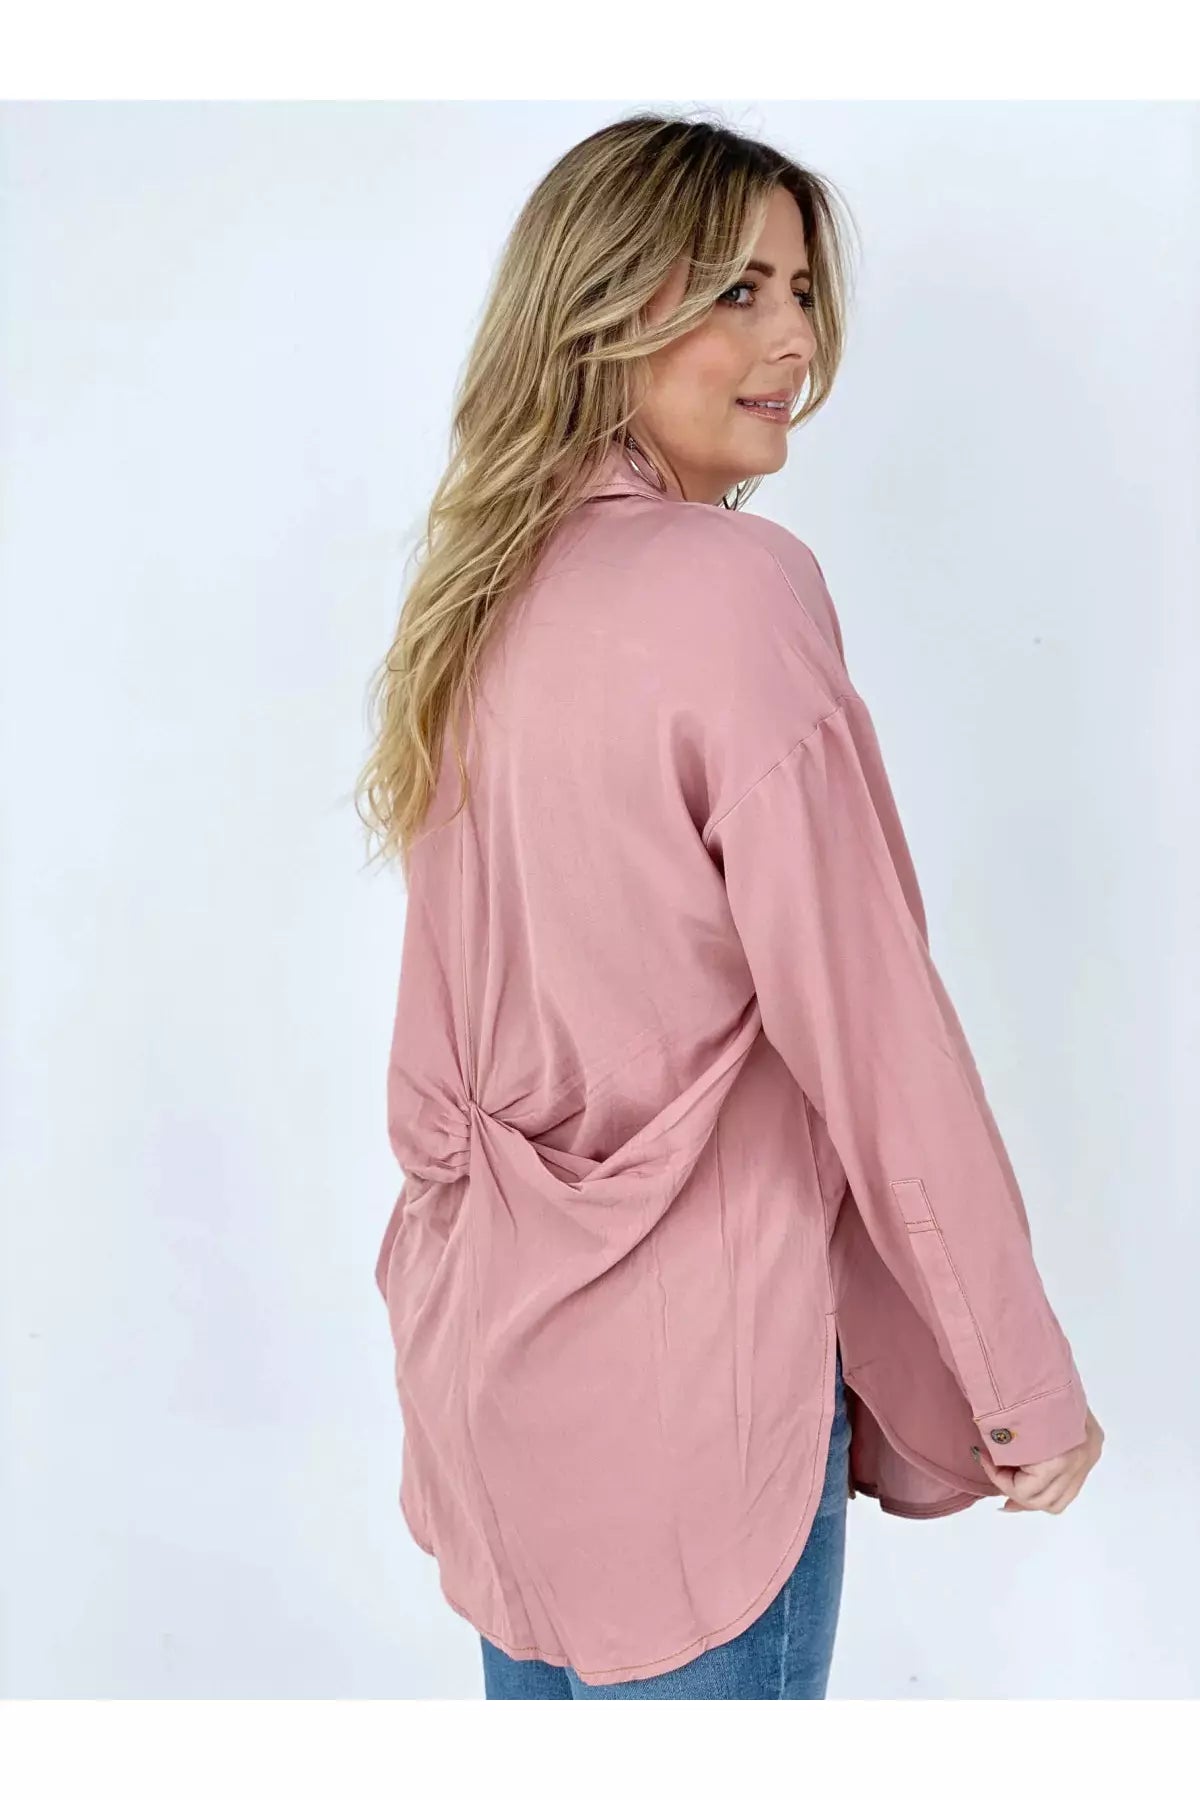 Easel "Twisted Tunic" Solid Button Down Tunic Shirt